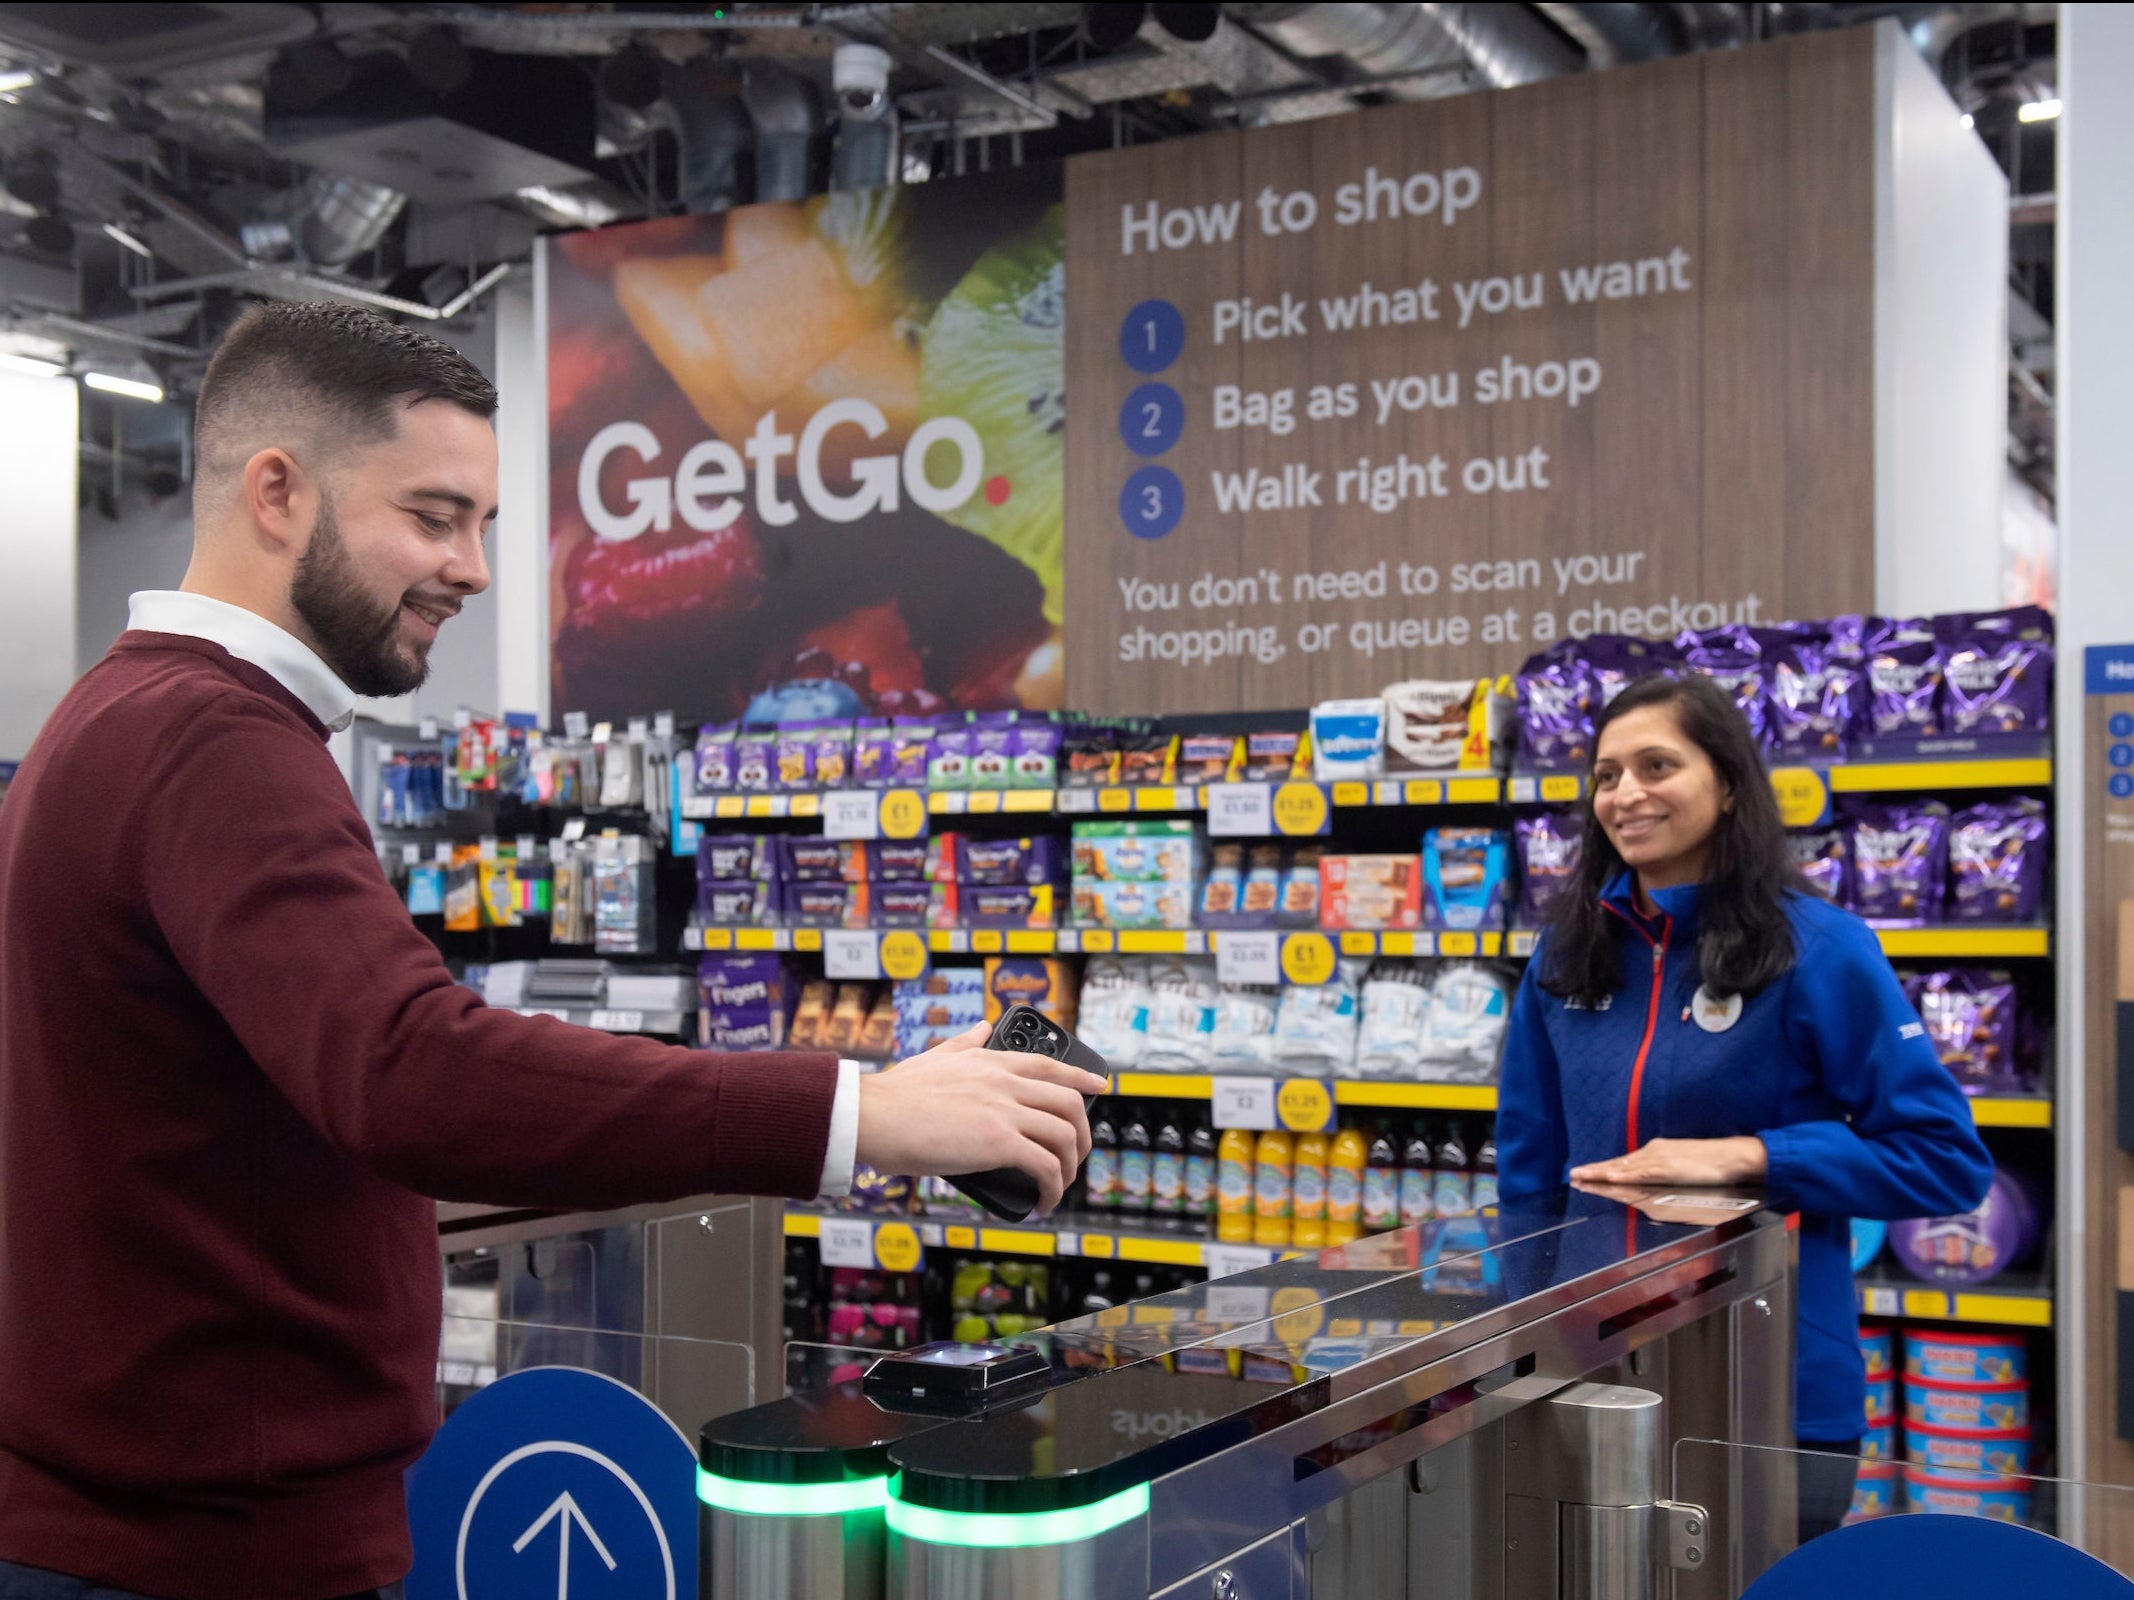 A customer uses the Tesco GetGo store in Holborn